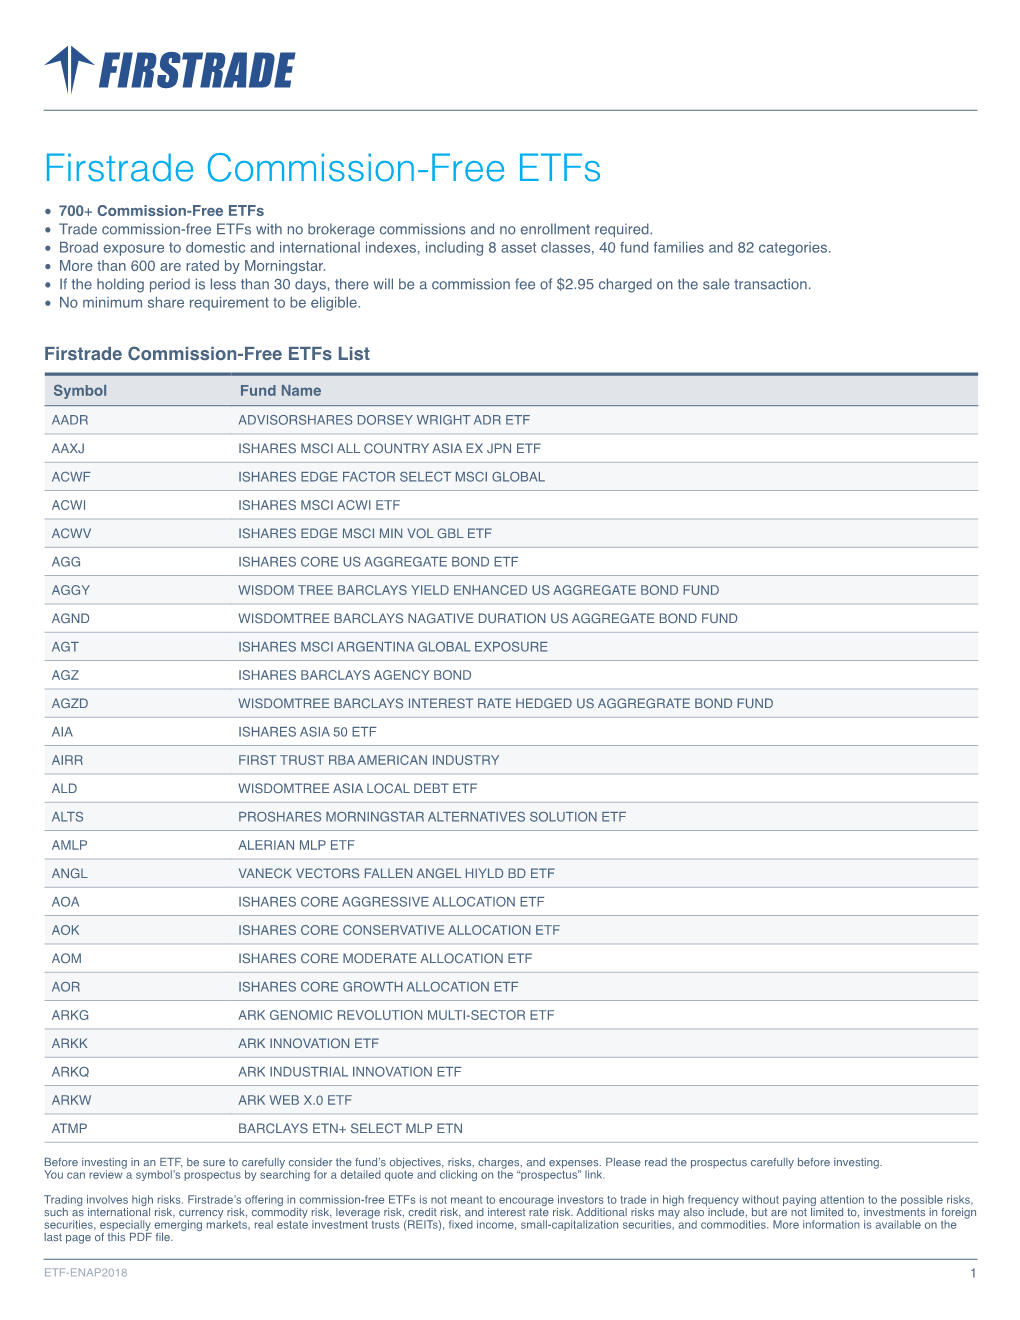 Firstrade Commission-Free Etfs • 700+ Commission-Free Etfs • Trade Commission-Free Etfs with No Brokerage Commissions and No Enrollment Required